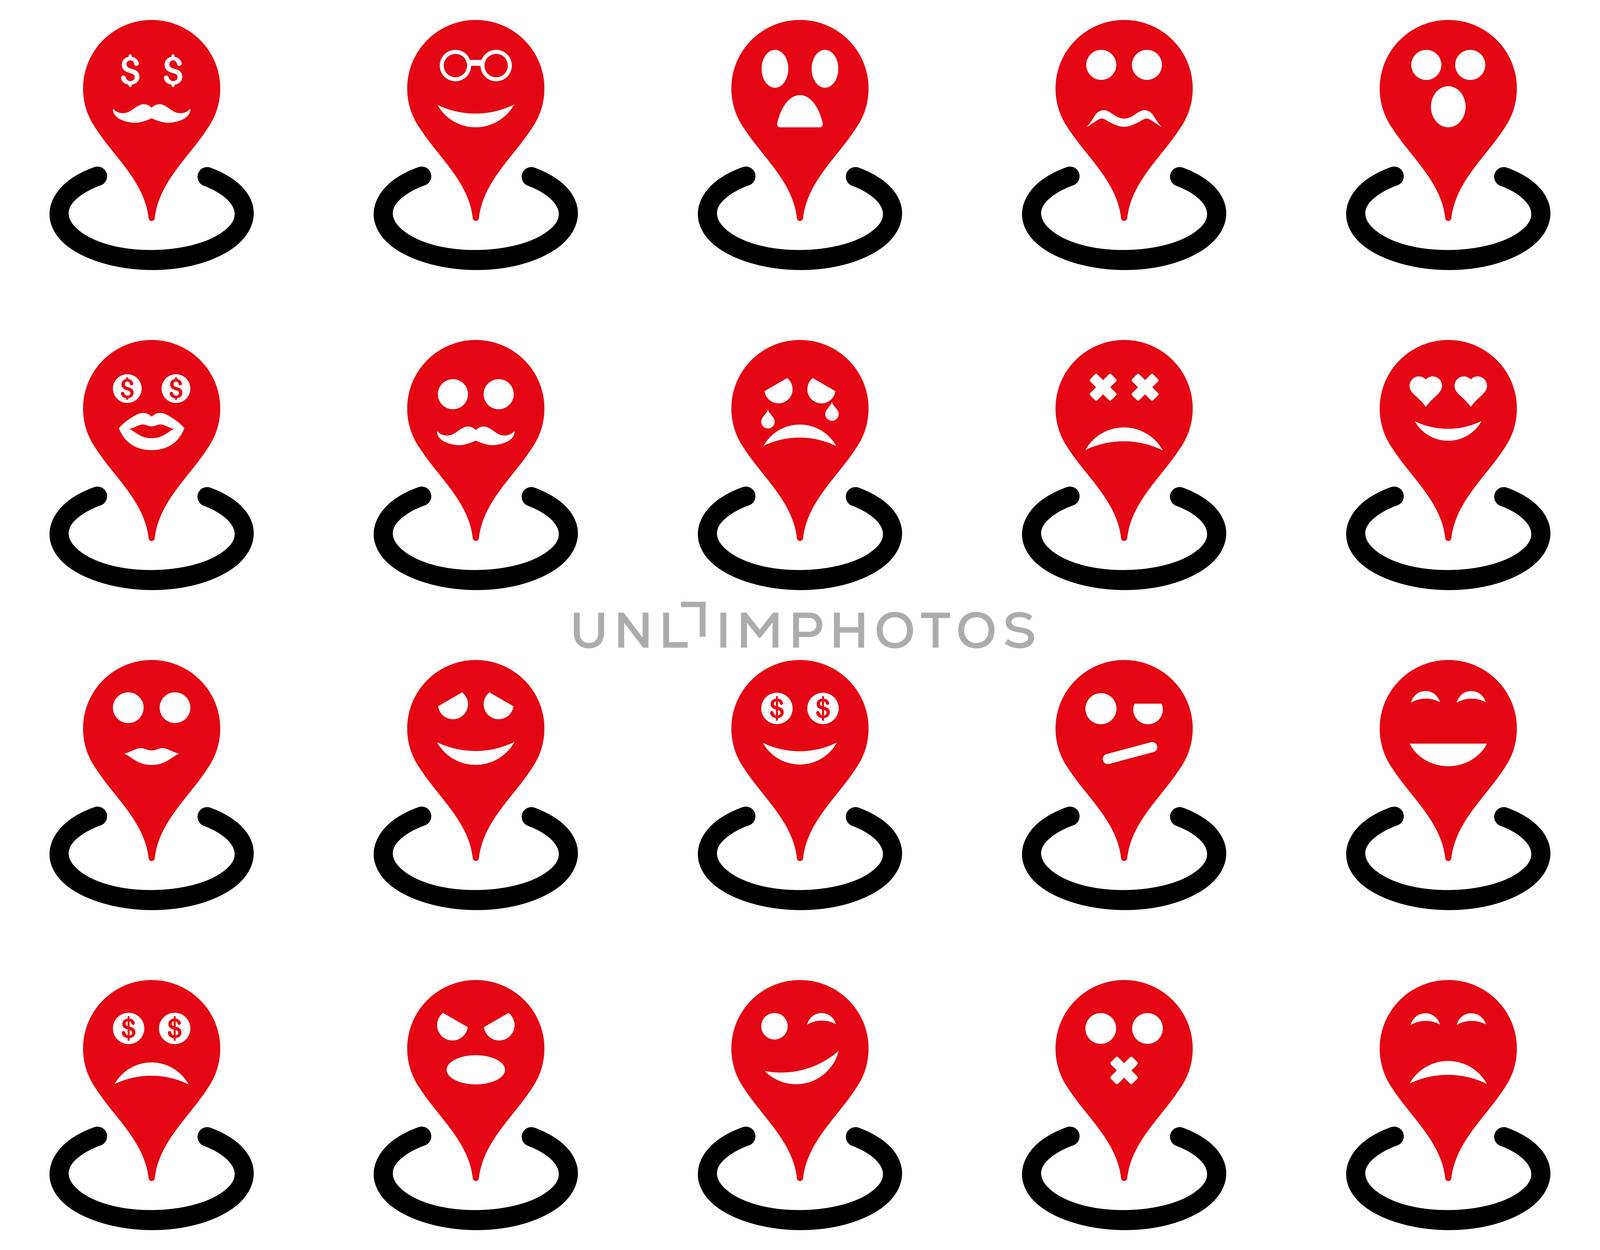 Smiled location icons. Glyph set style is bicolor flat images, intensive red and black symbols, isolated on a white background.